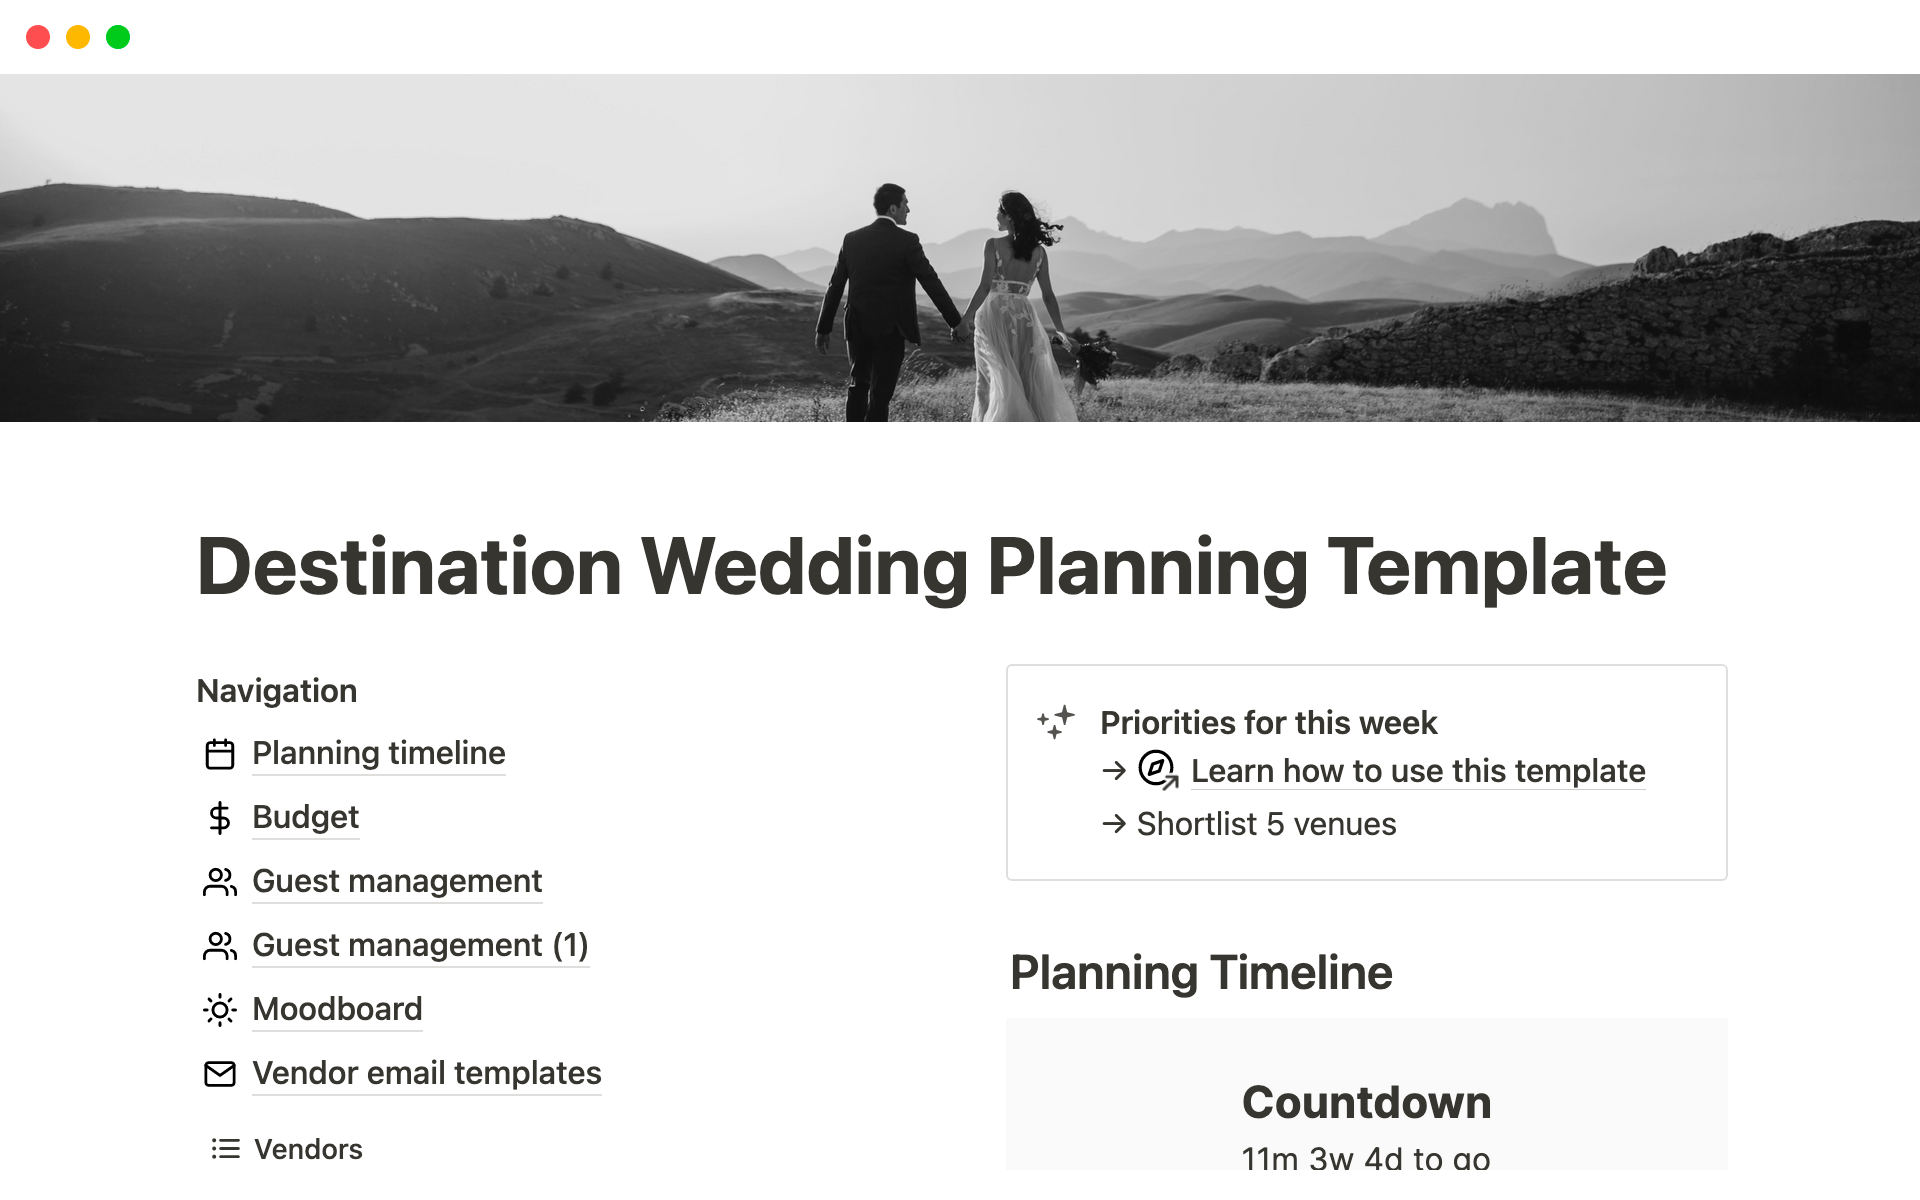 Plan and celebrate your destination wedding with ease! Our Destination Wedding Planning Template is the most comprehensive, and beautifully organized way to plan your destination wedding using Notion.